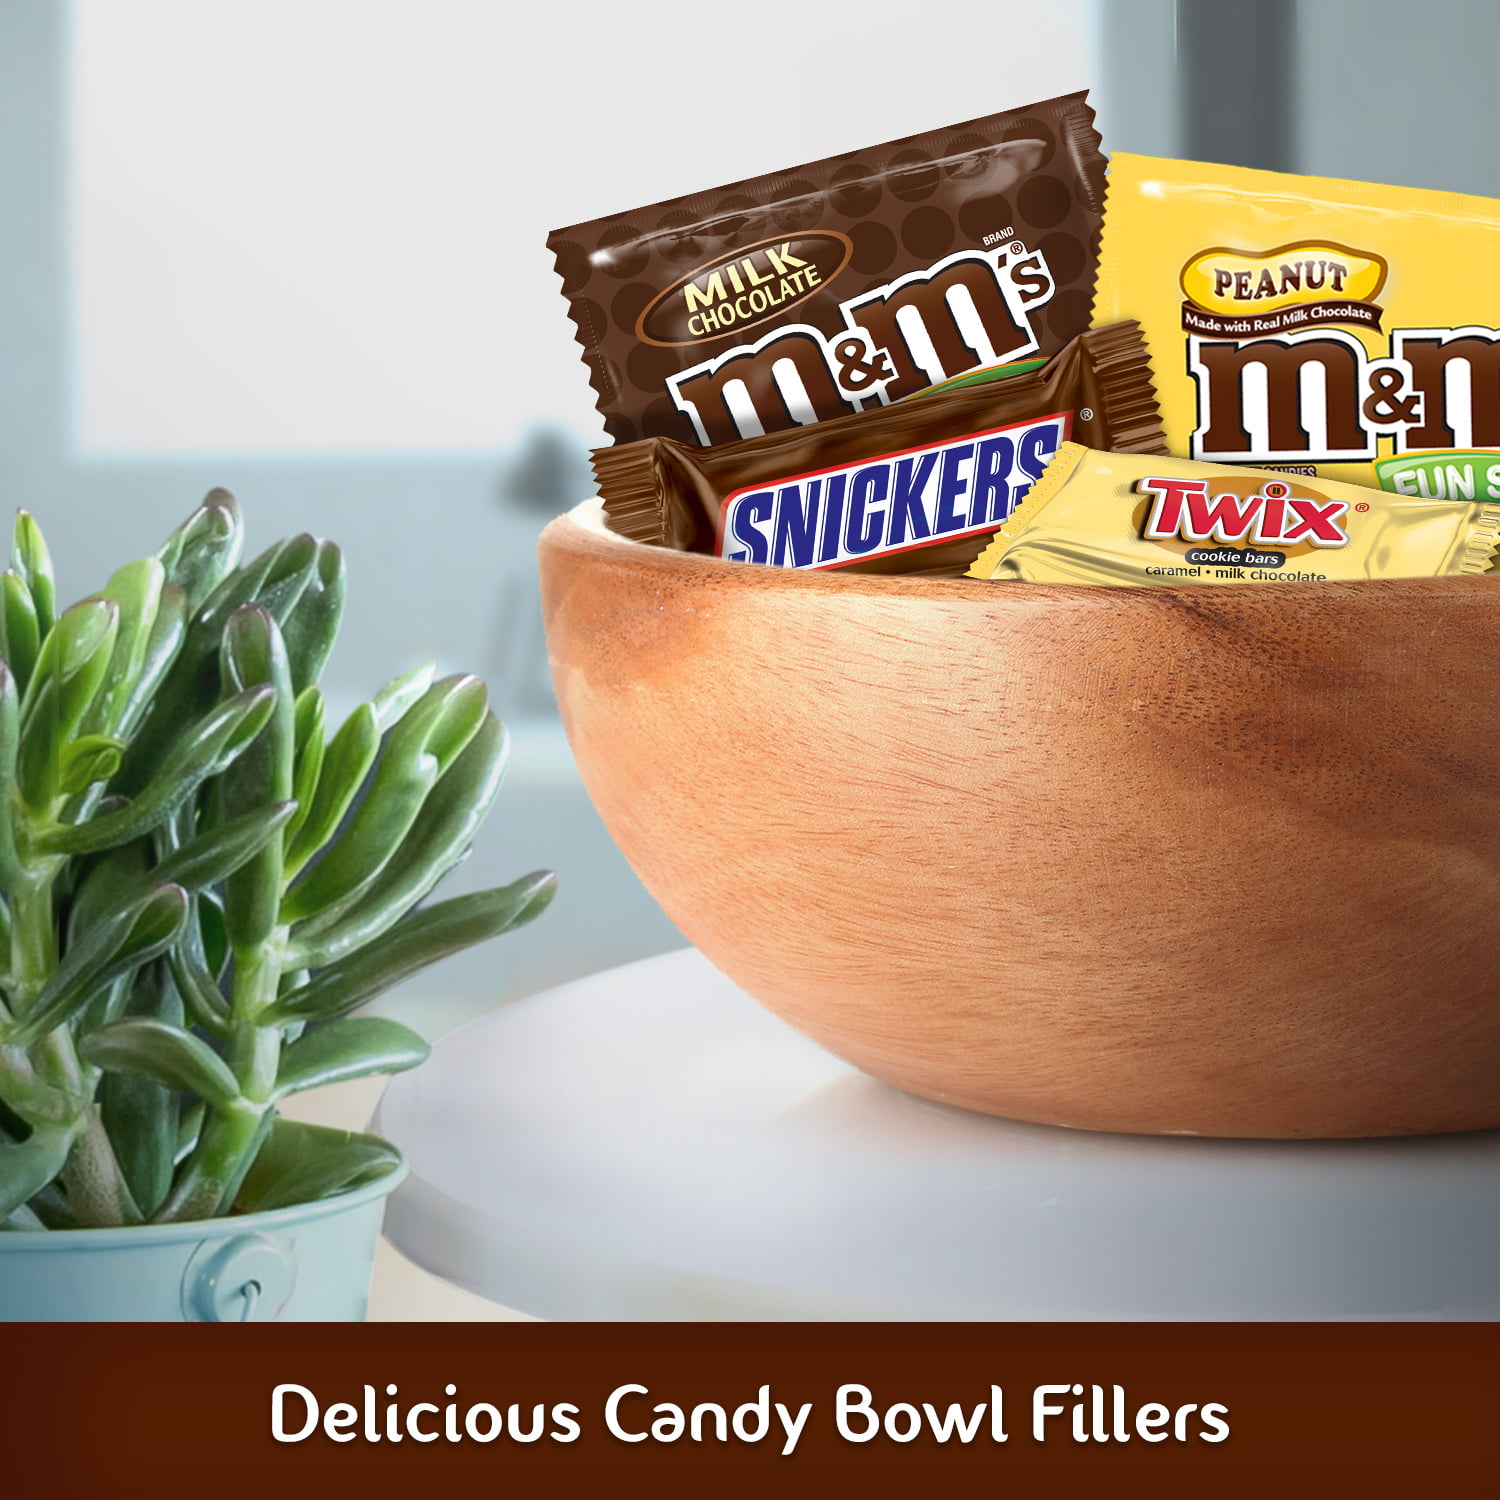 SNICKERS, M&M'S & TWIX Fun Size Chocolate Candy Variety Mix, 33.9